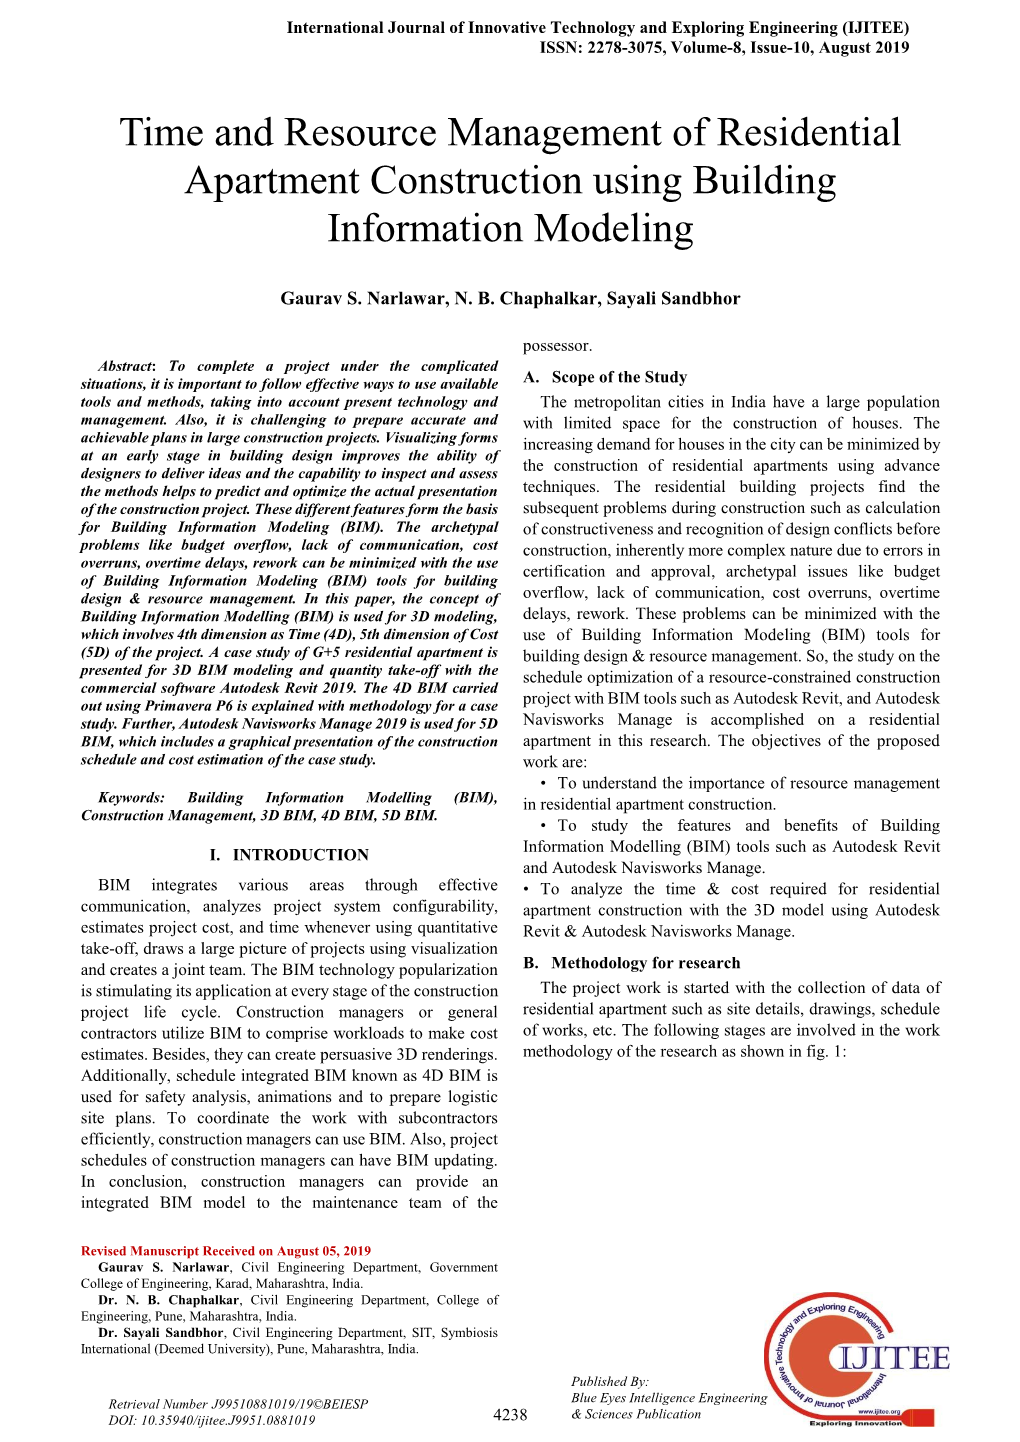 Time and Resource Management of Residential Apartment Construction Using Building Information Modeling